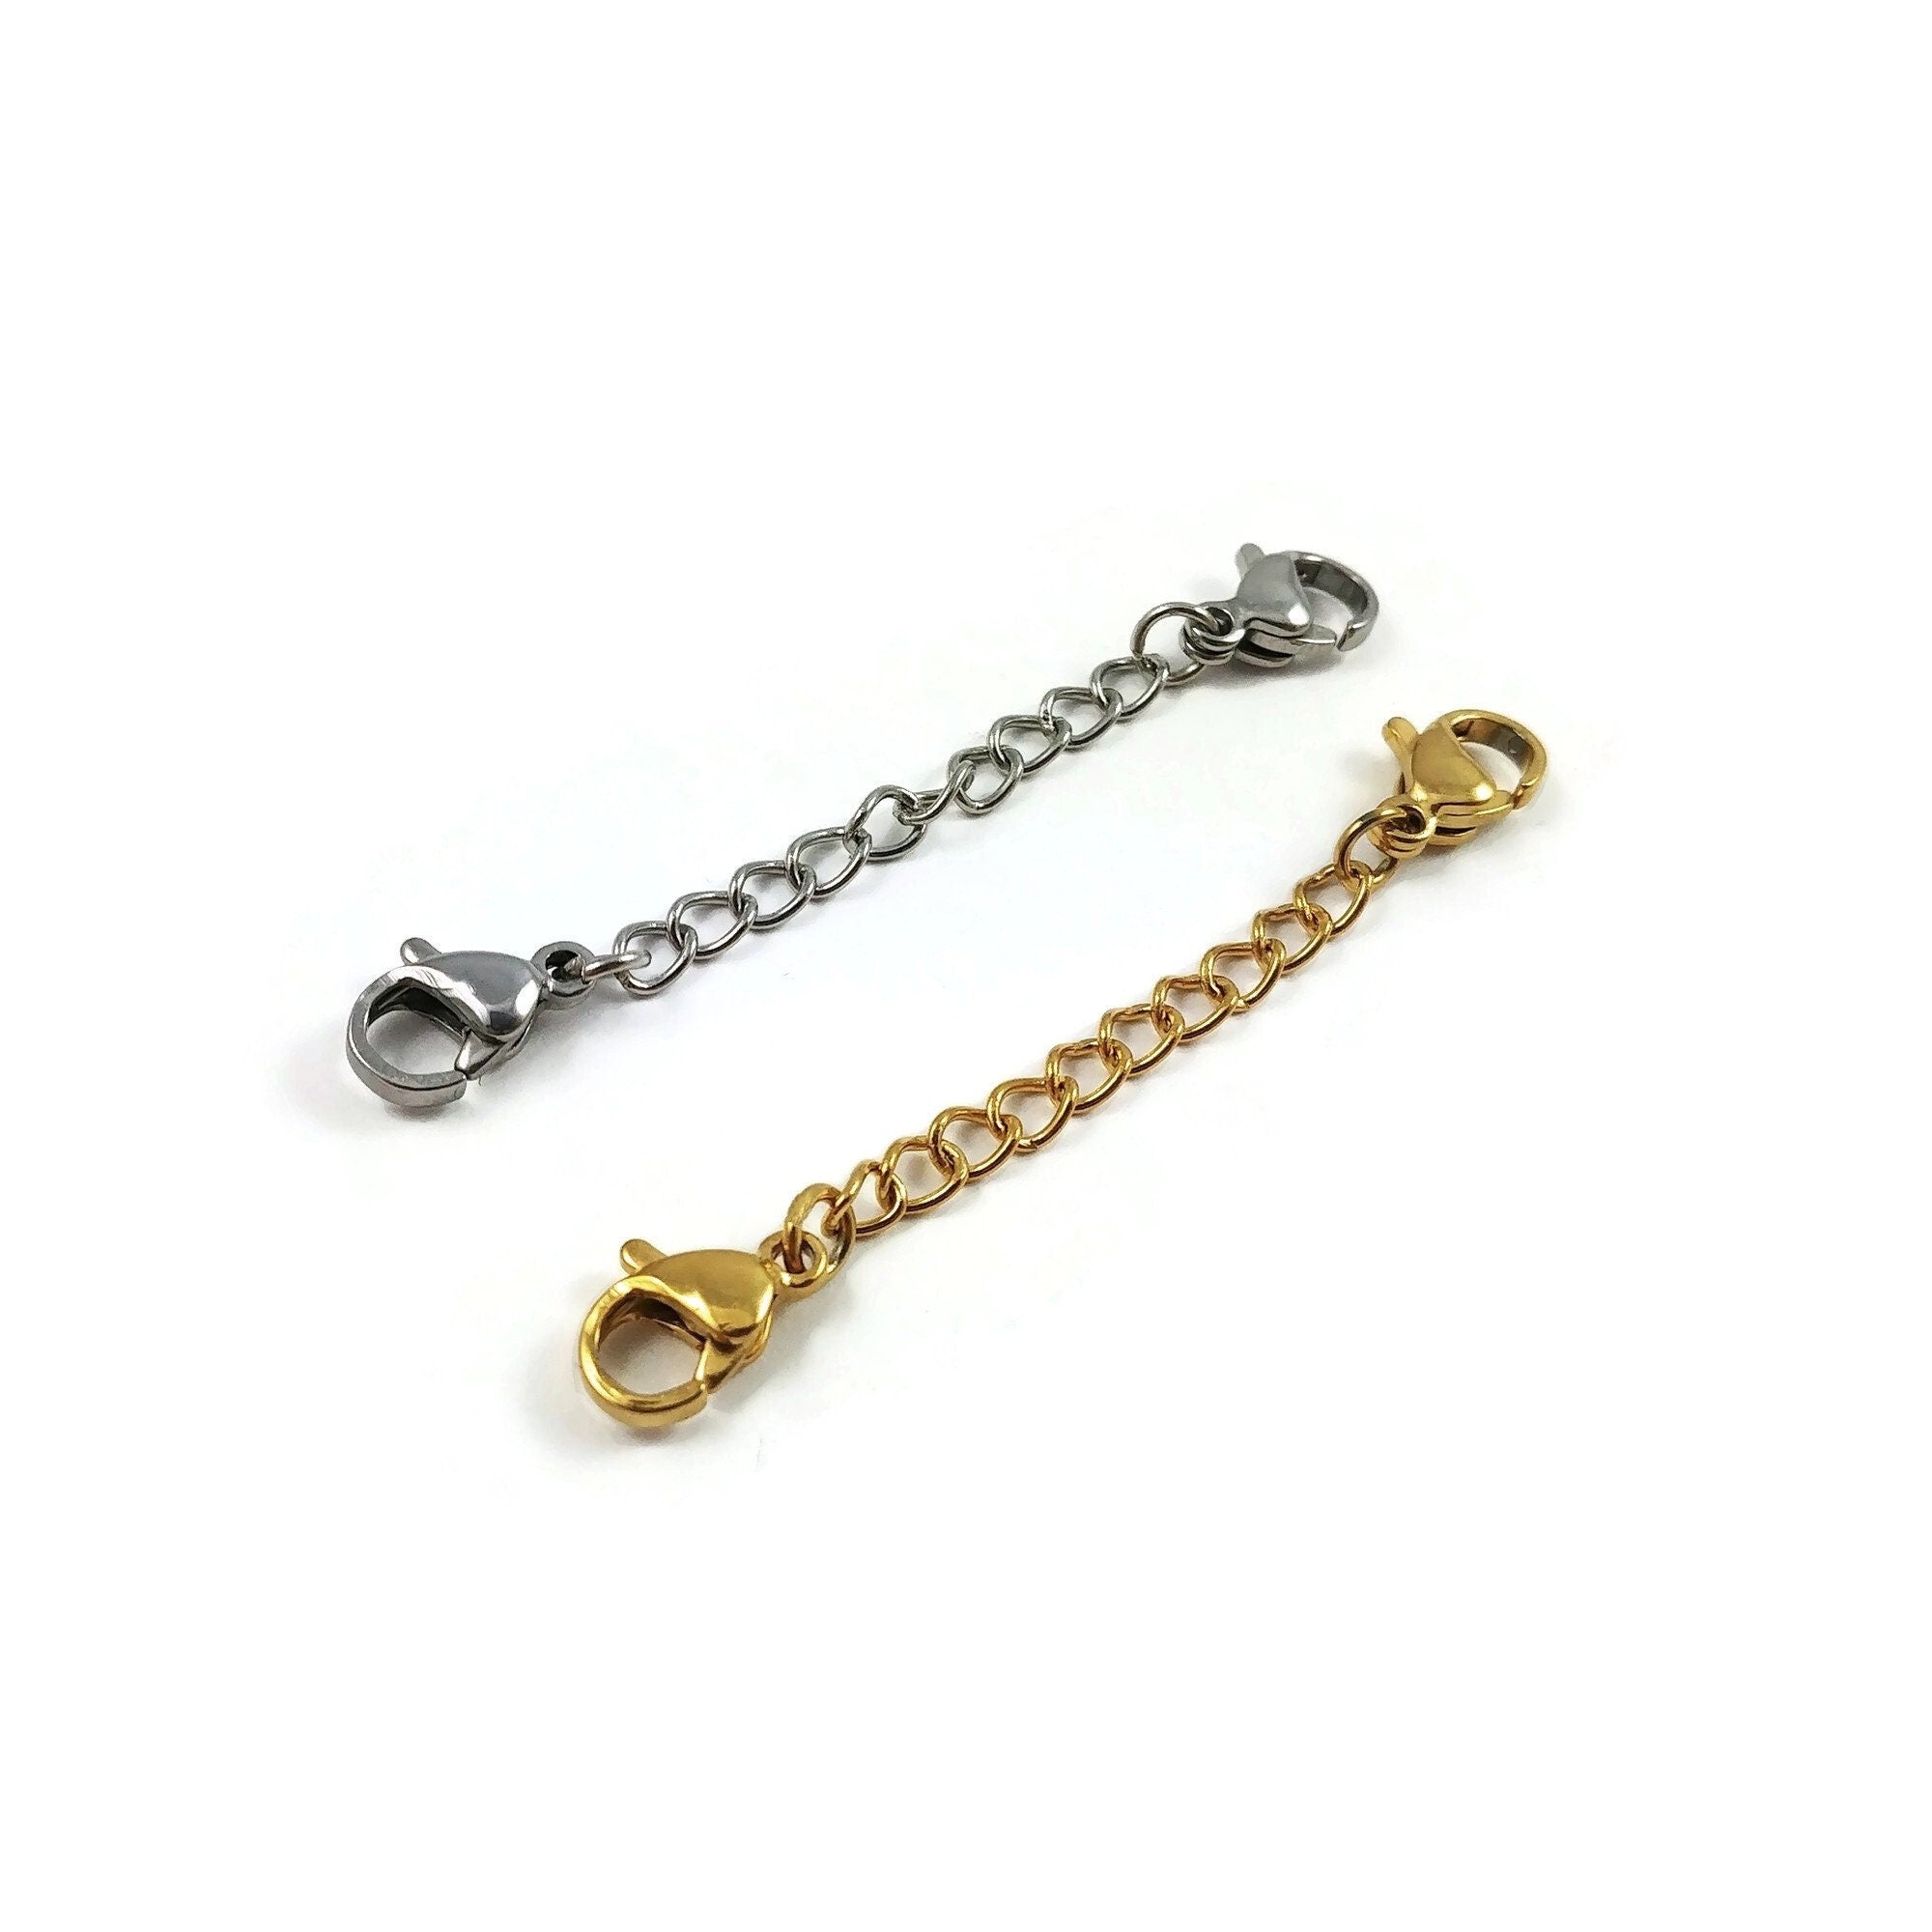 Necklace Extenders, Gold Plated Chain Extenders for Necklaces